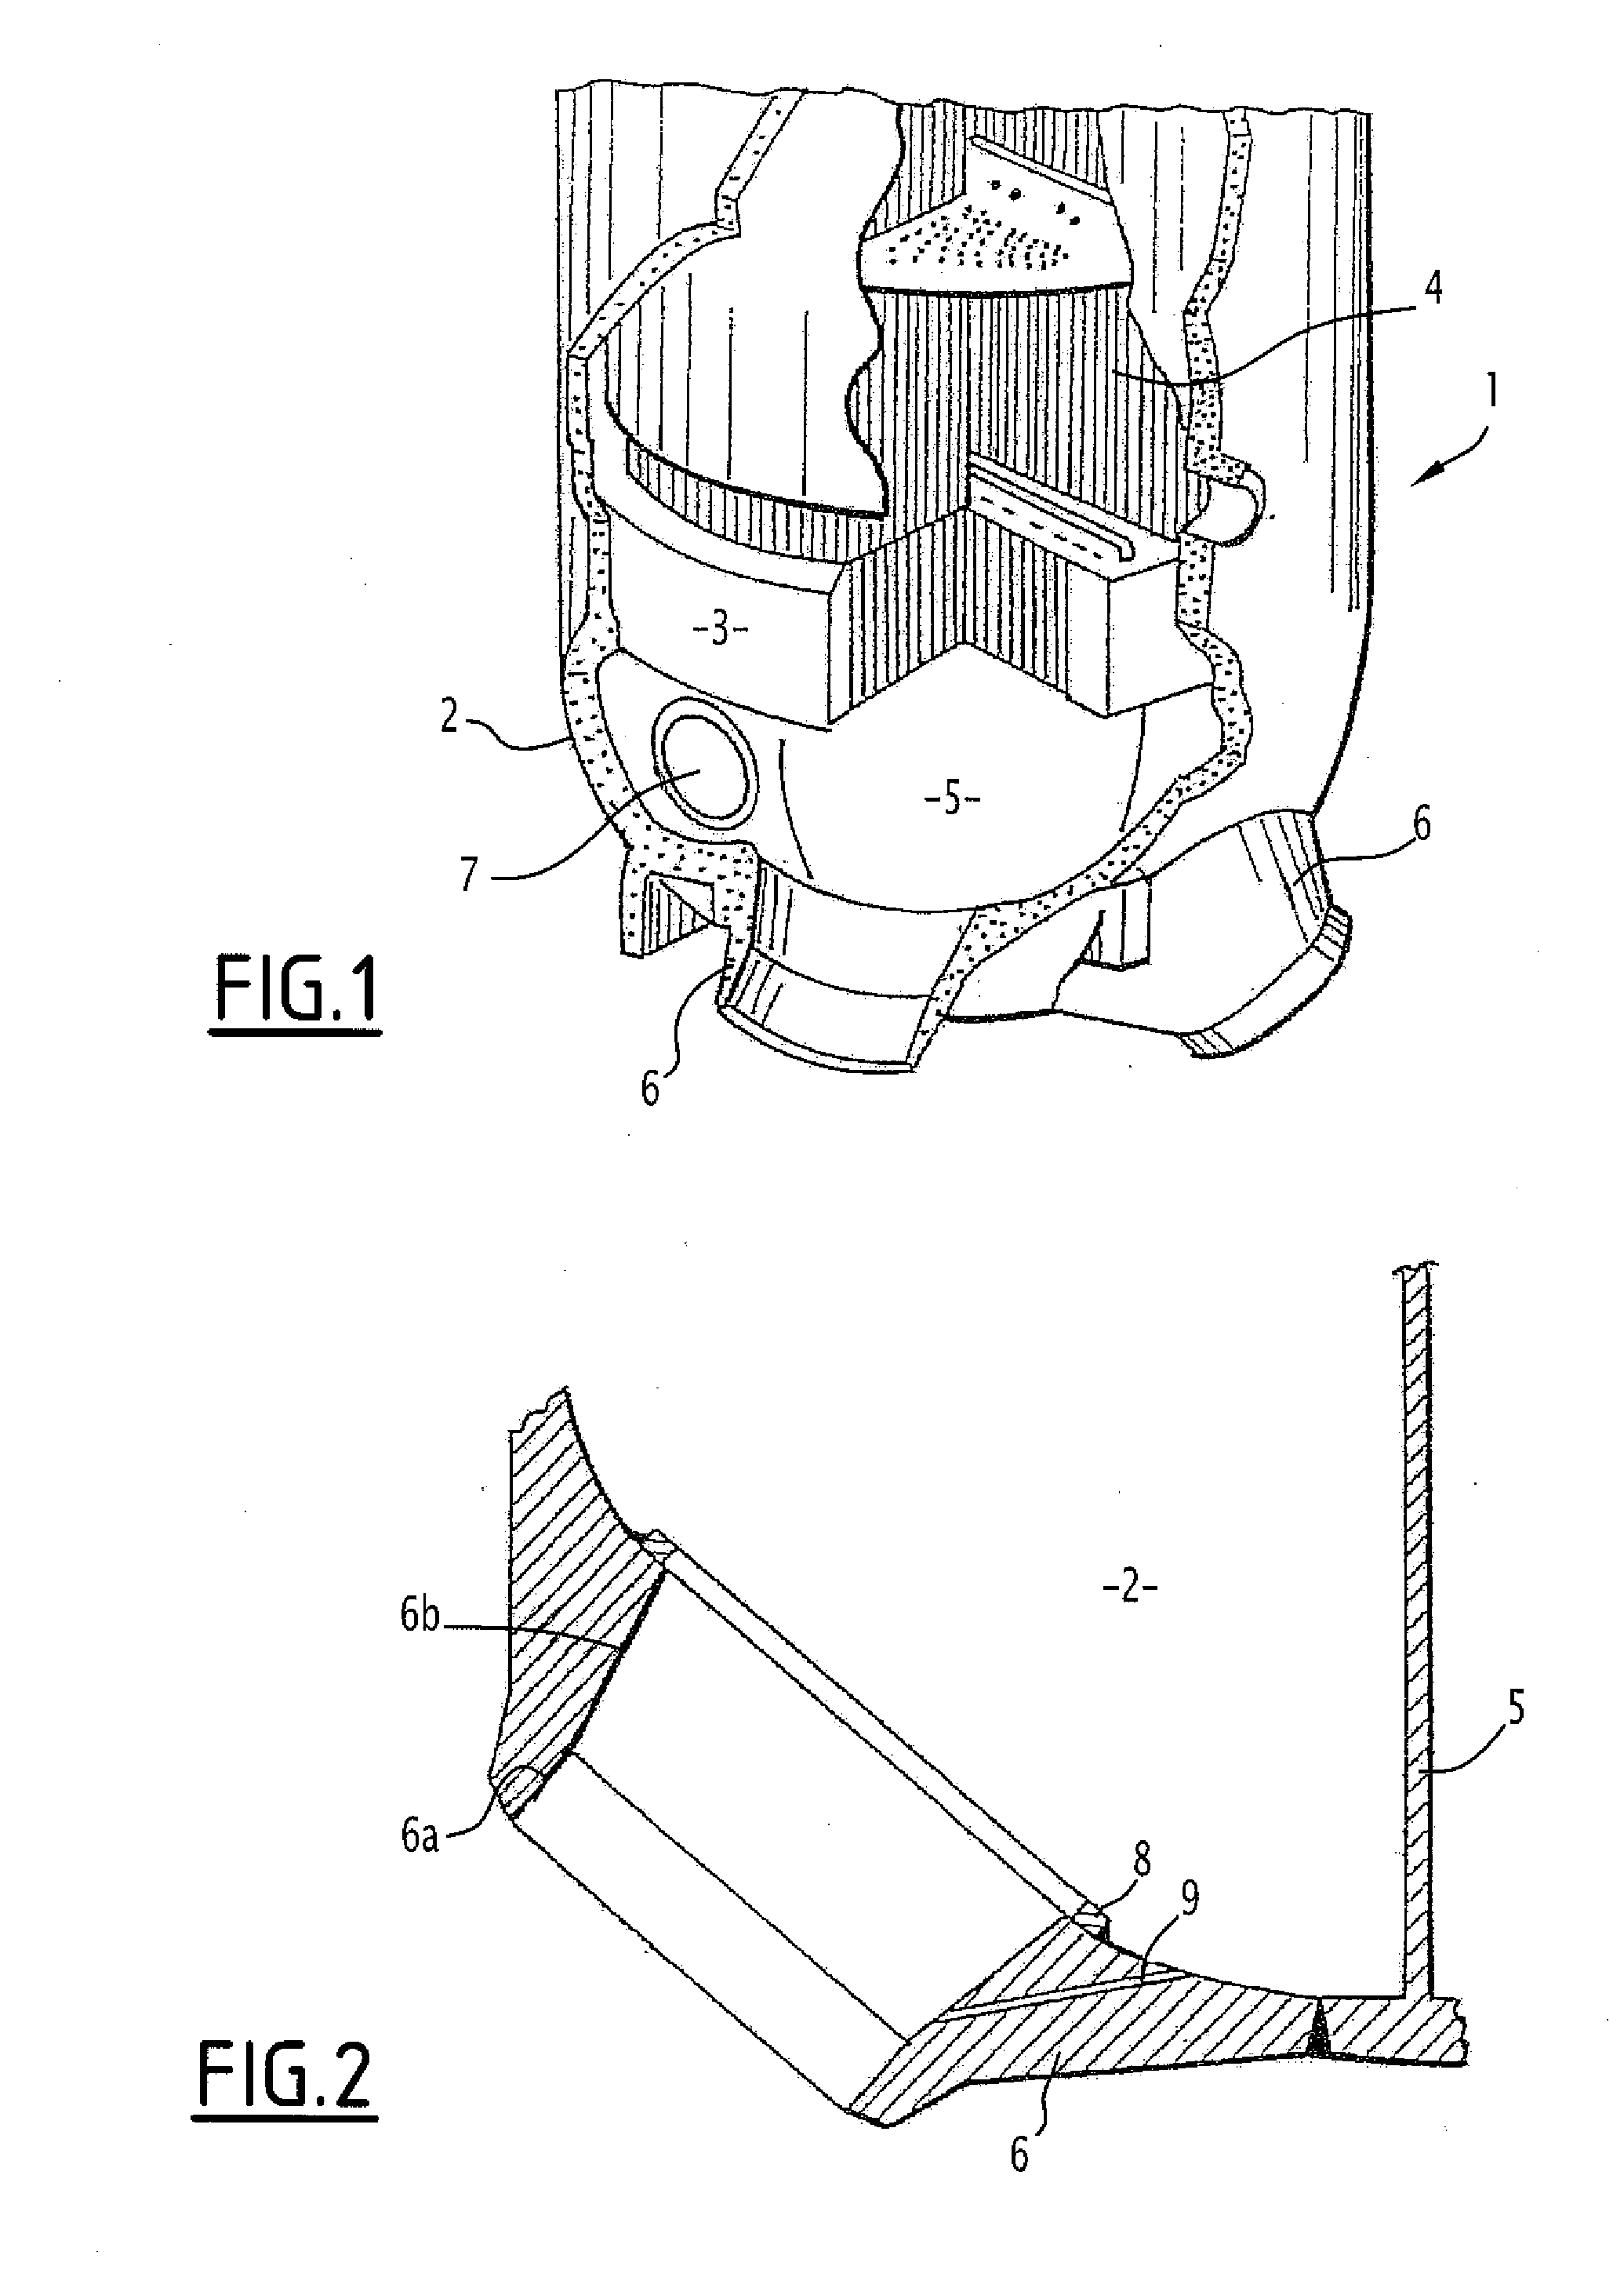 Sealed stopper for an opening in a tubing for joining a chamber and a piping, particularly in the steam generator of a nuclear pressurised water reactor